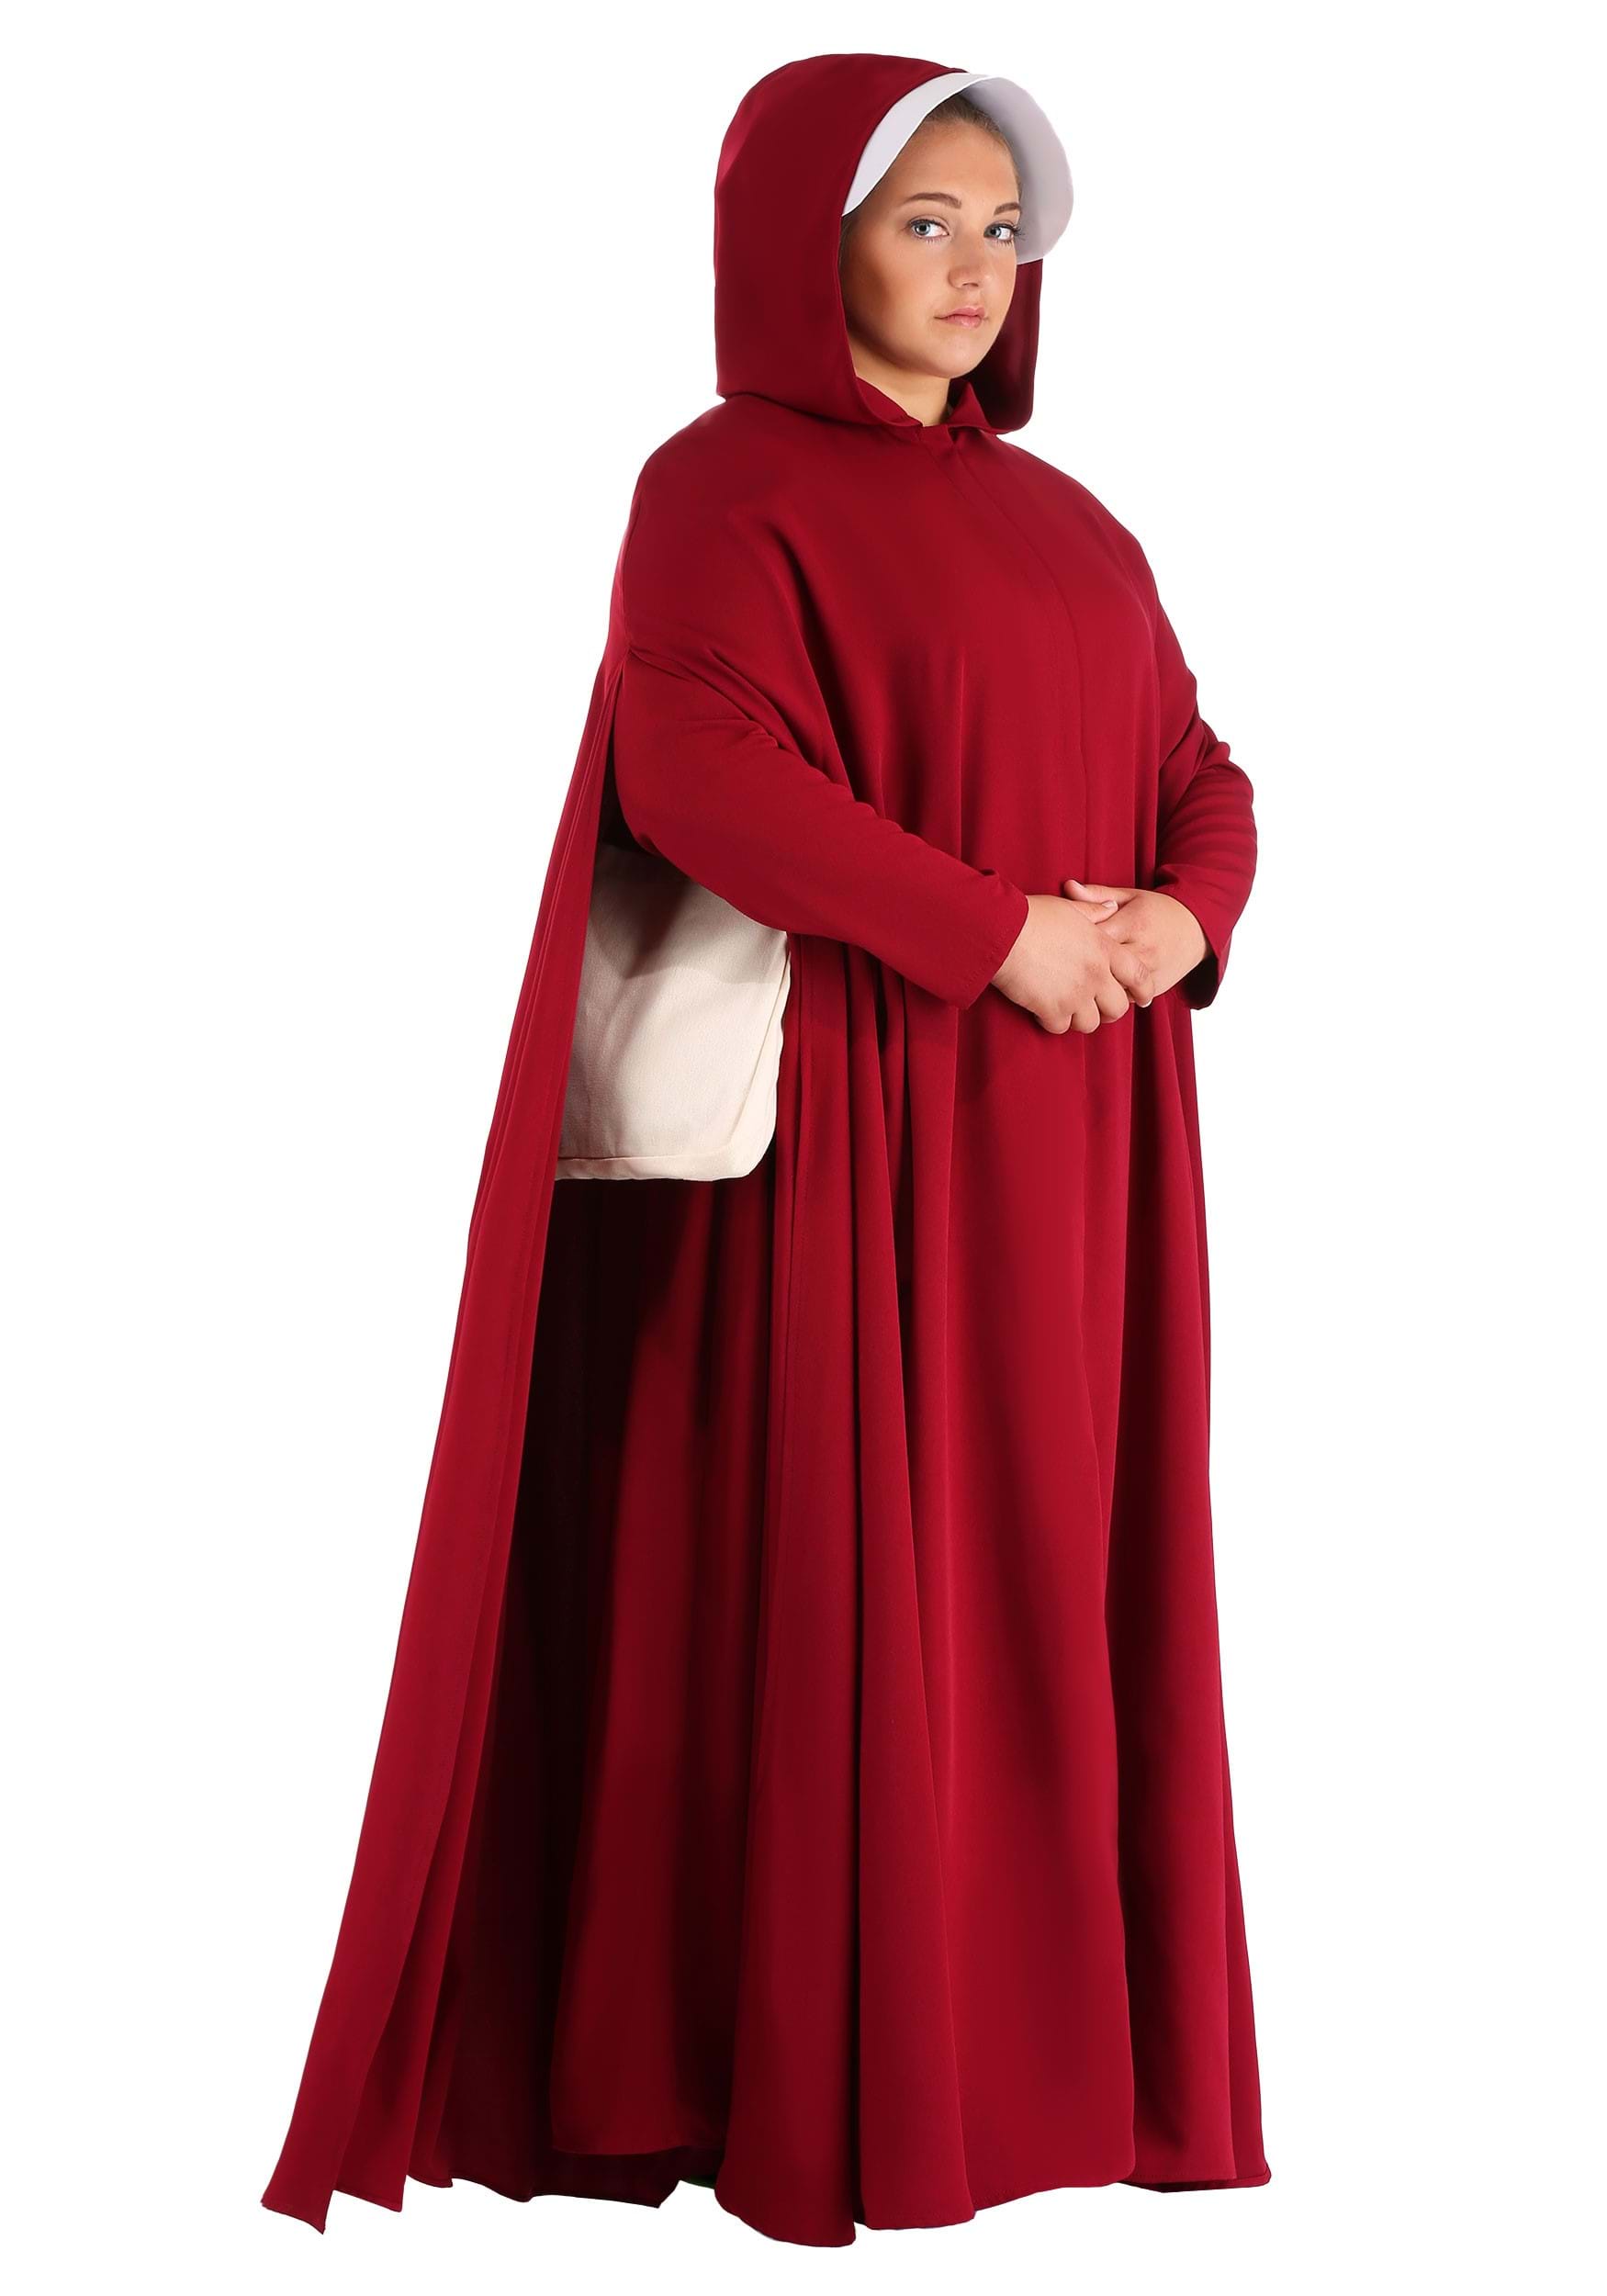 Photos - Fancy Dress Deluxe FUN Costumes Handmaid's Tale  Plus Size Costume For Women Red/Wh 